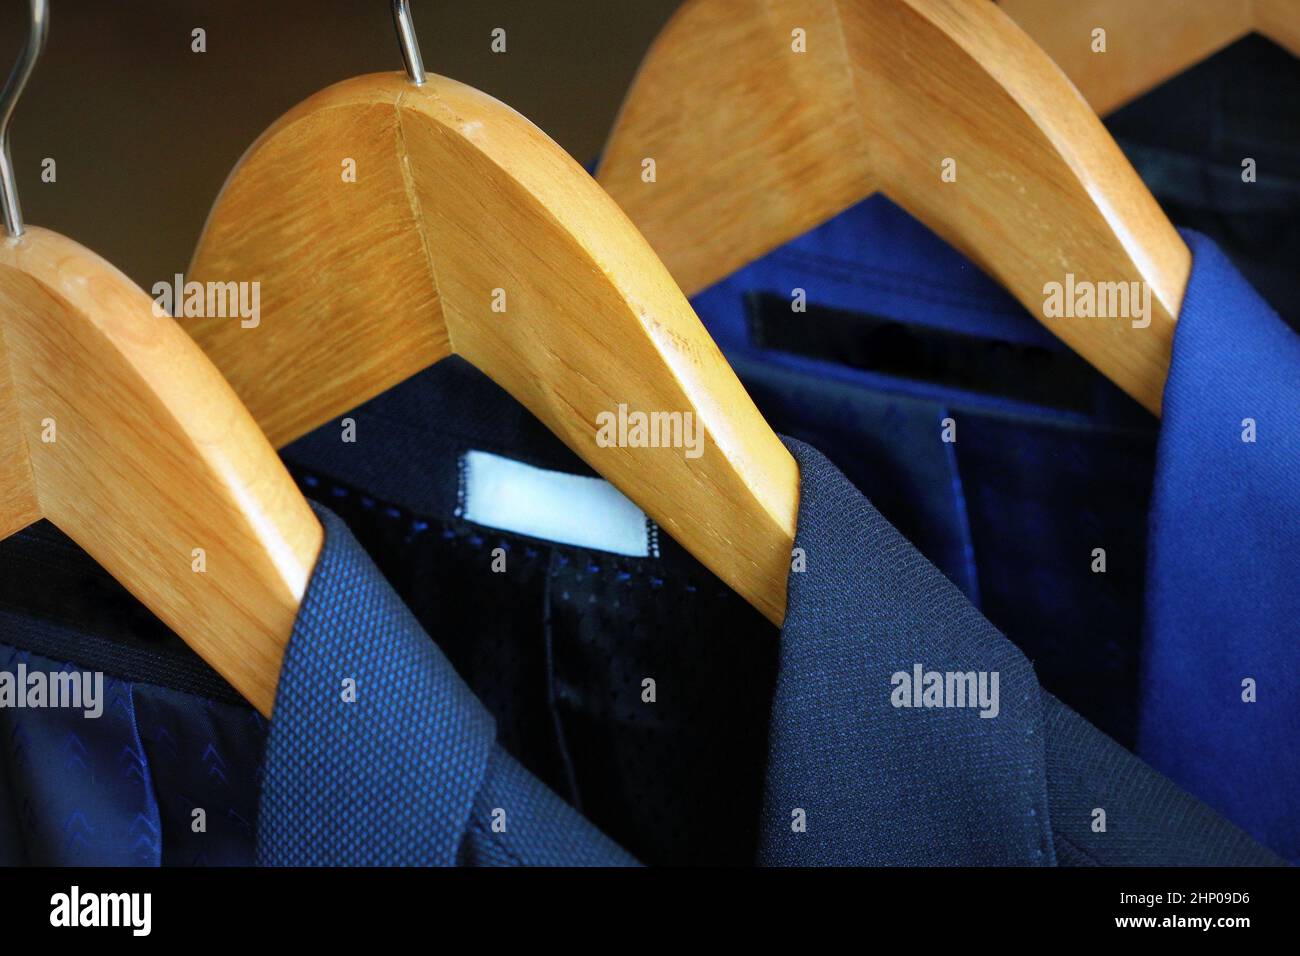 Row of men's suits hanging on rack for sale . Stock Photo